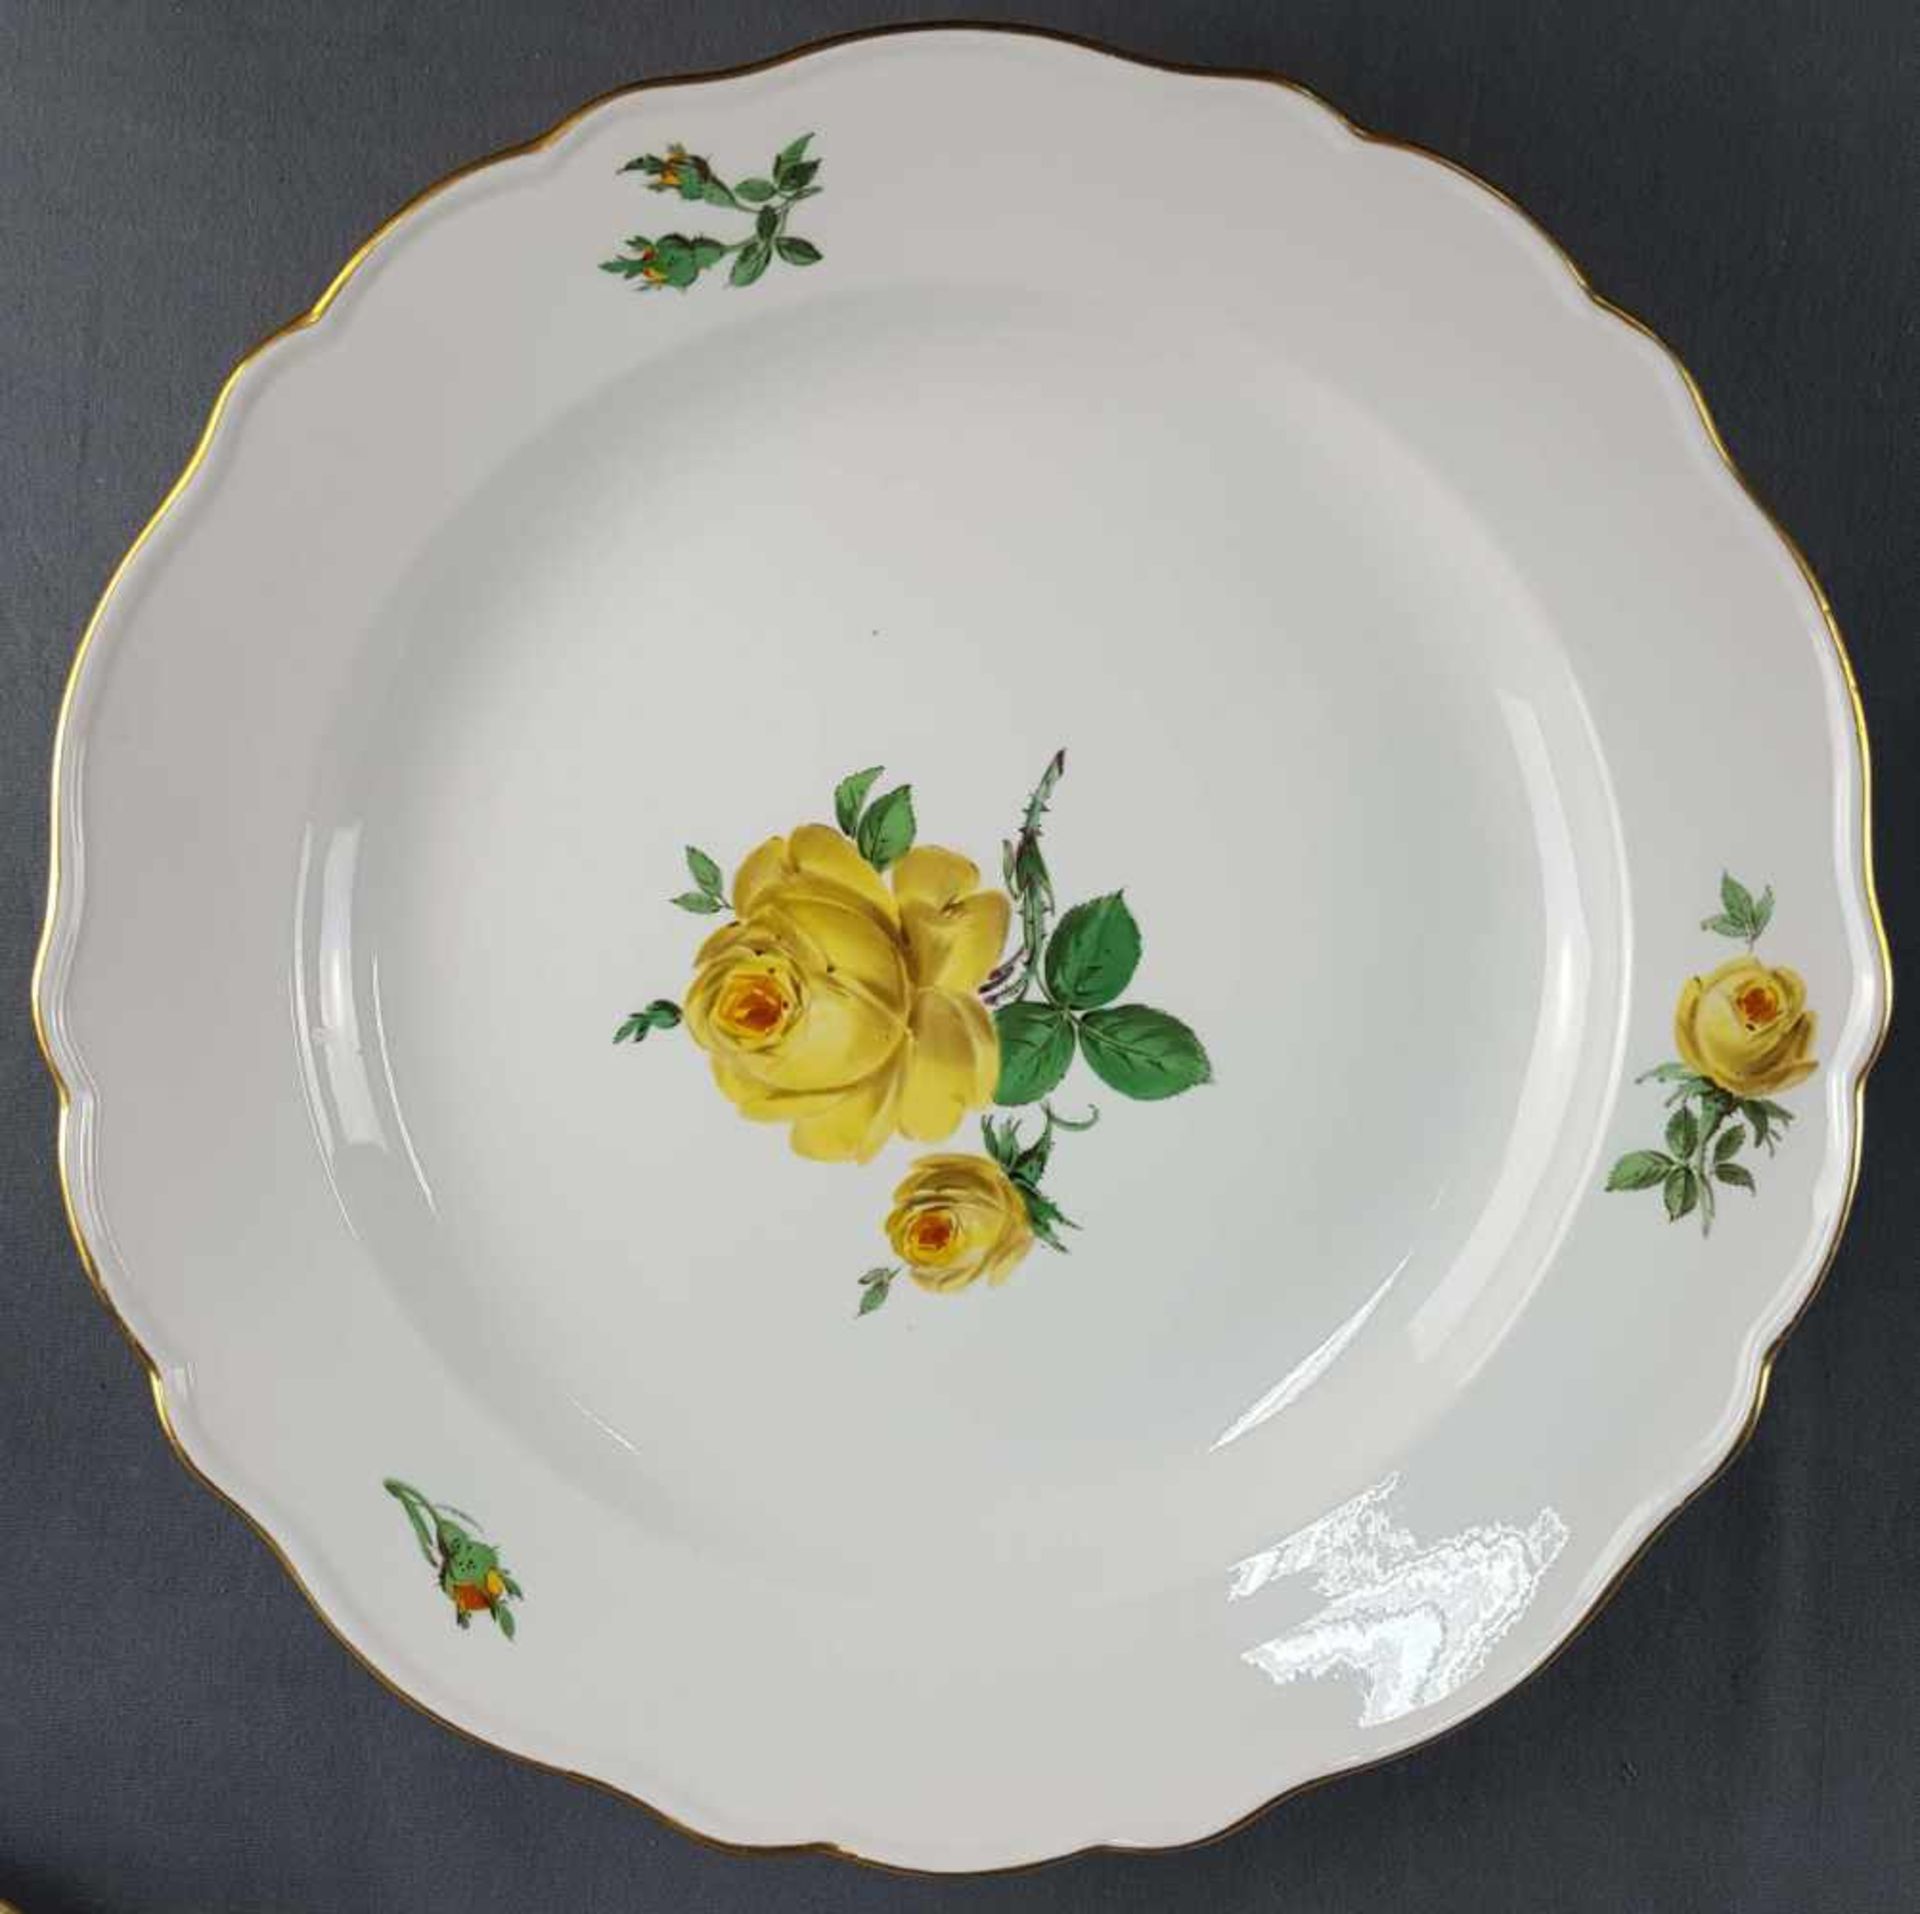 Dining service Meissen porcelain, yellow rose with gold rim. - Image 13 of 18